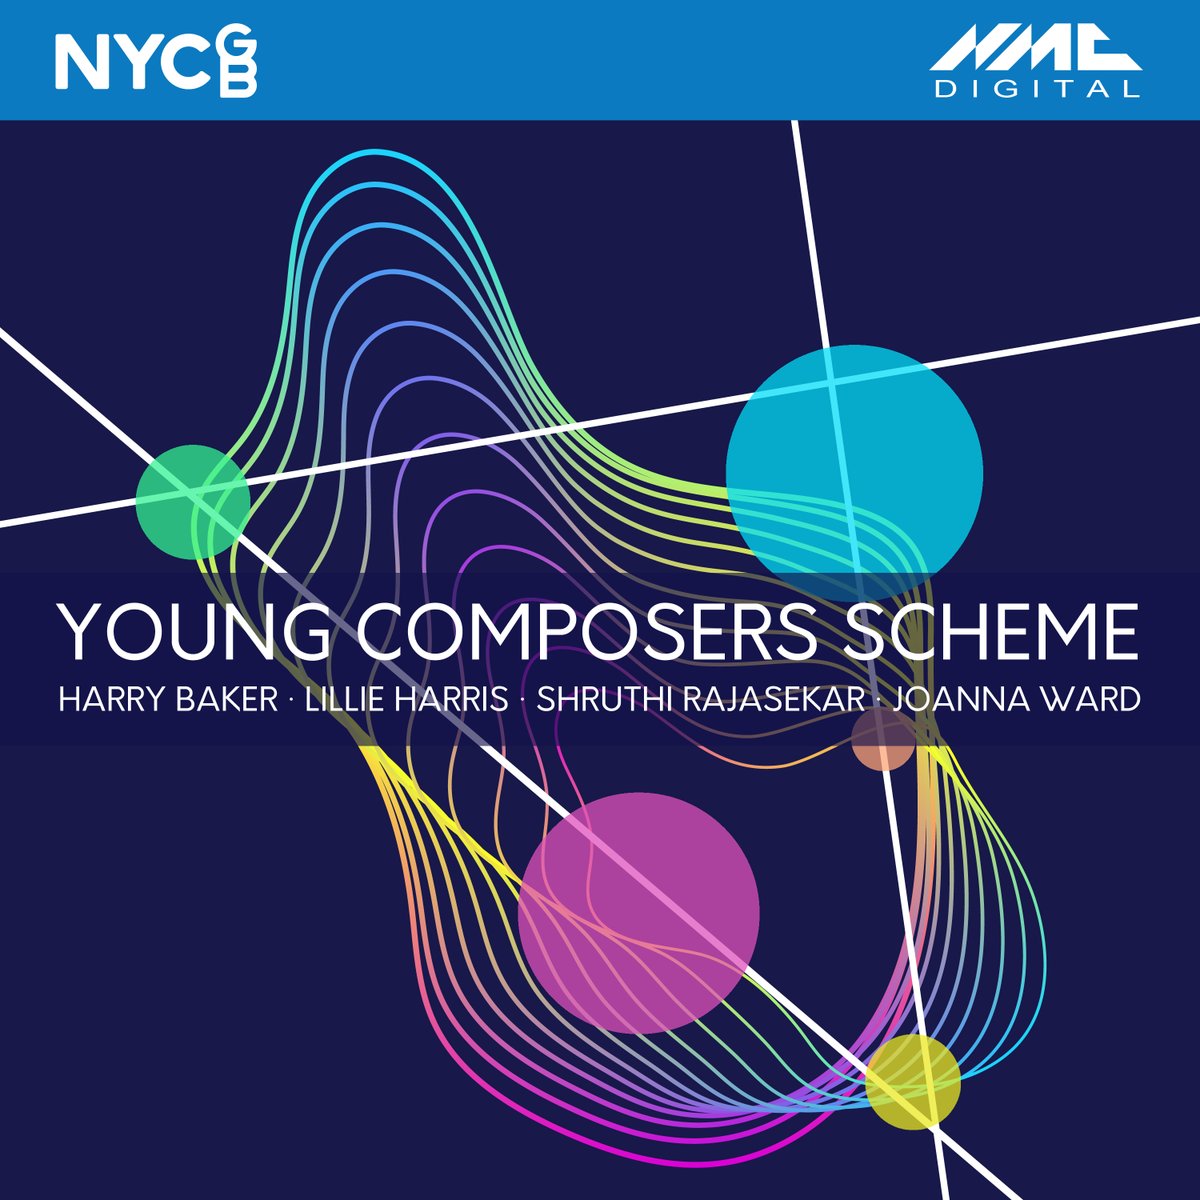 Today is the last day to help get our January releases in the @officialcharts! All UK CD sales & streaming counts towards @Chineke4Change 'Spark Catchers' and @nycgb 'Young Composers Scheme' chart position tomorrow 🤞